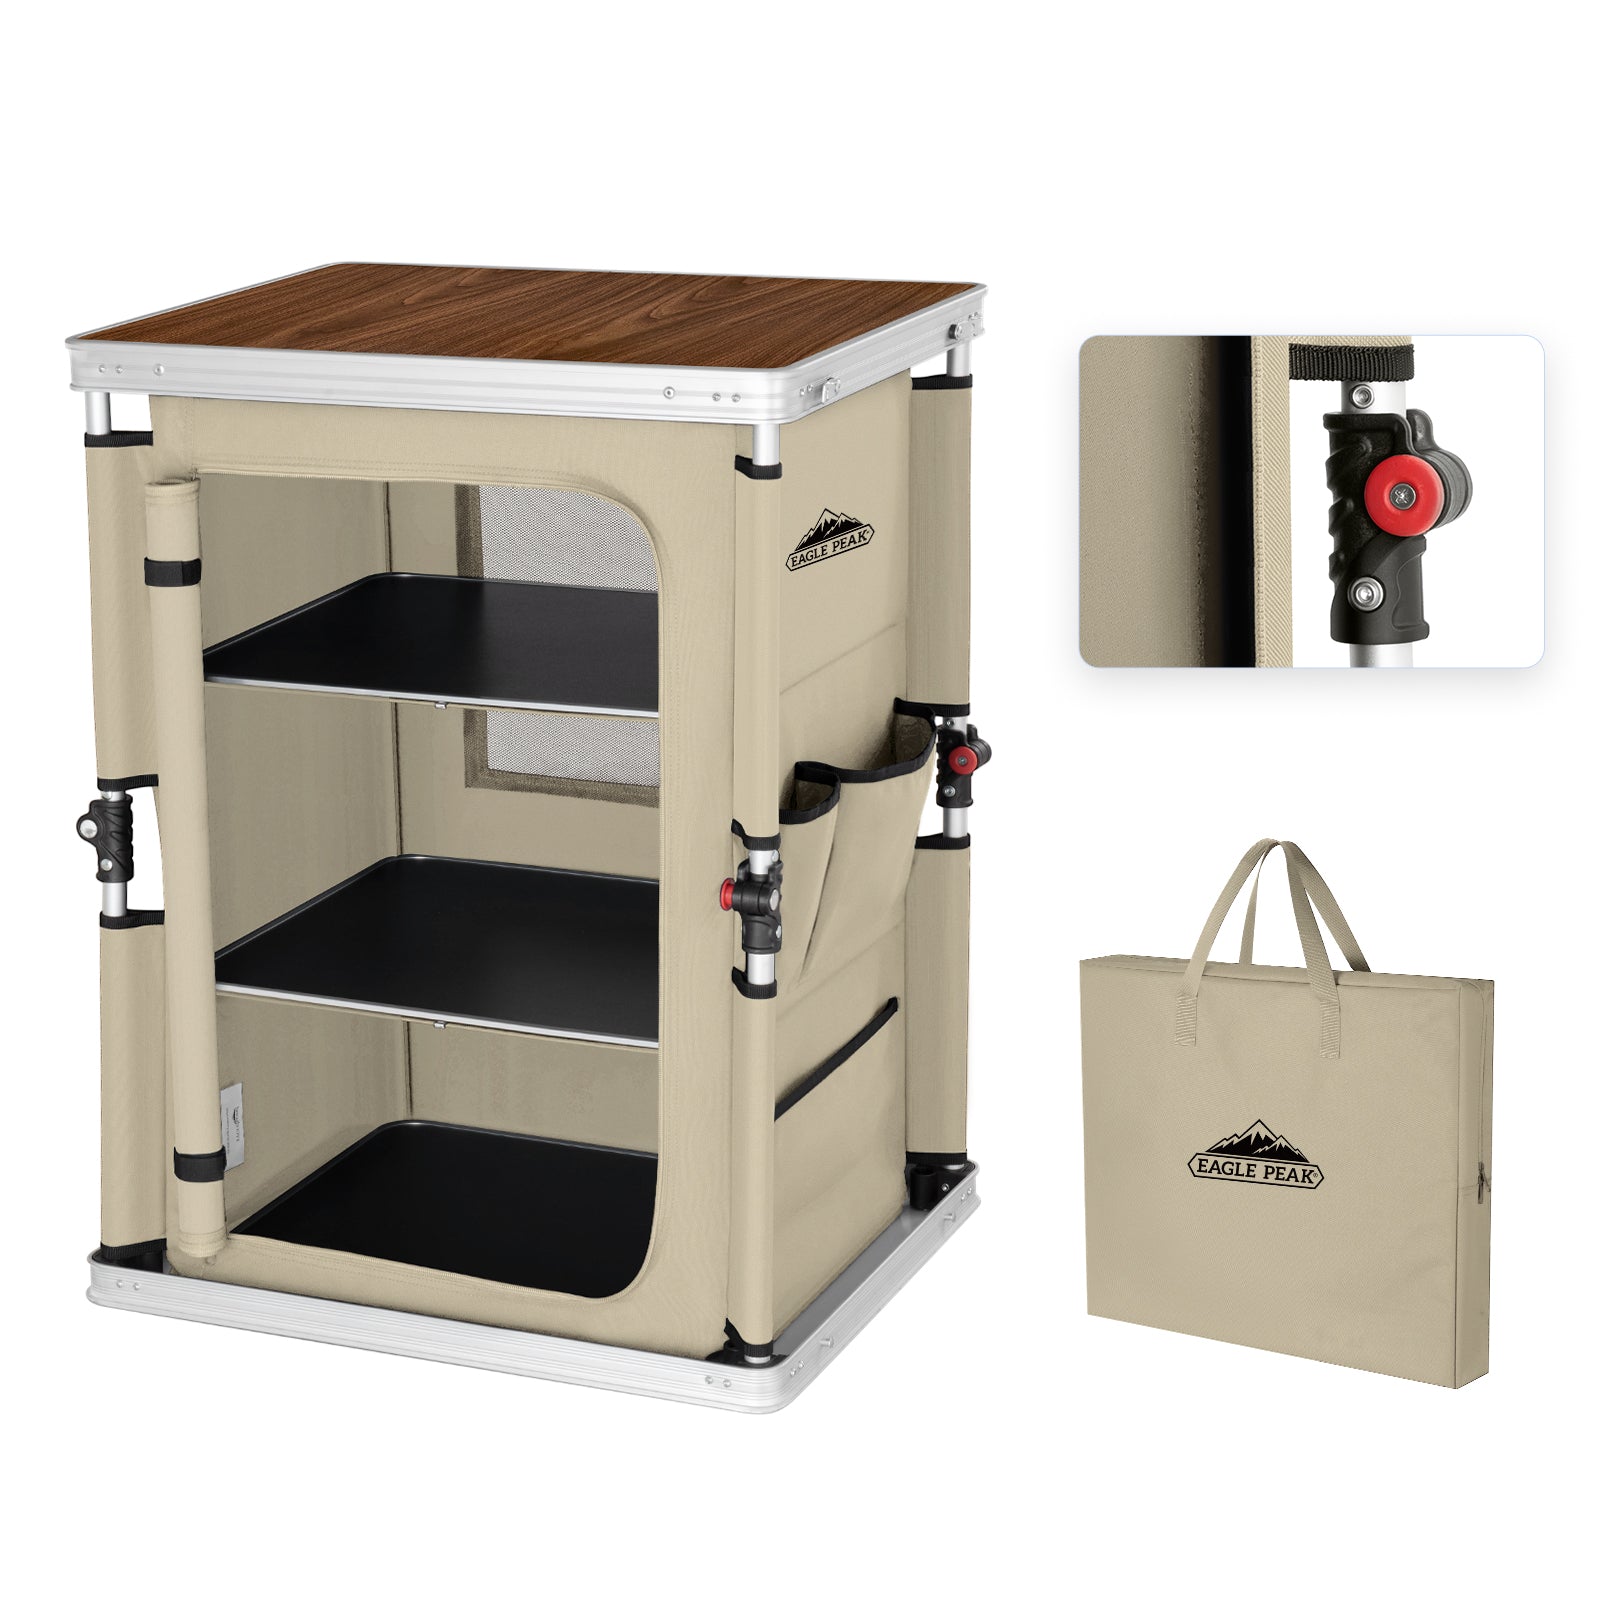 Folding Portable Camping Storage Cabinet to Organize Your Camping